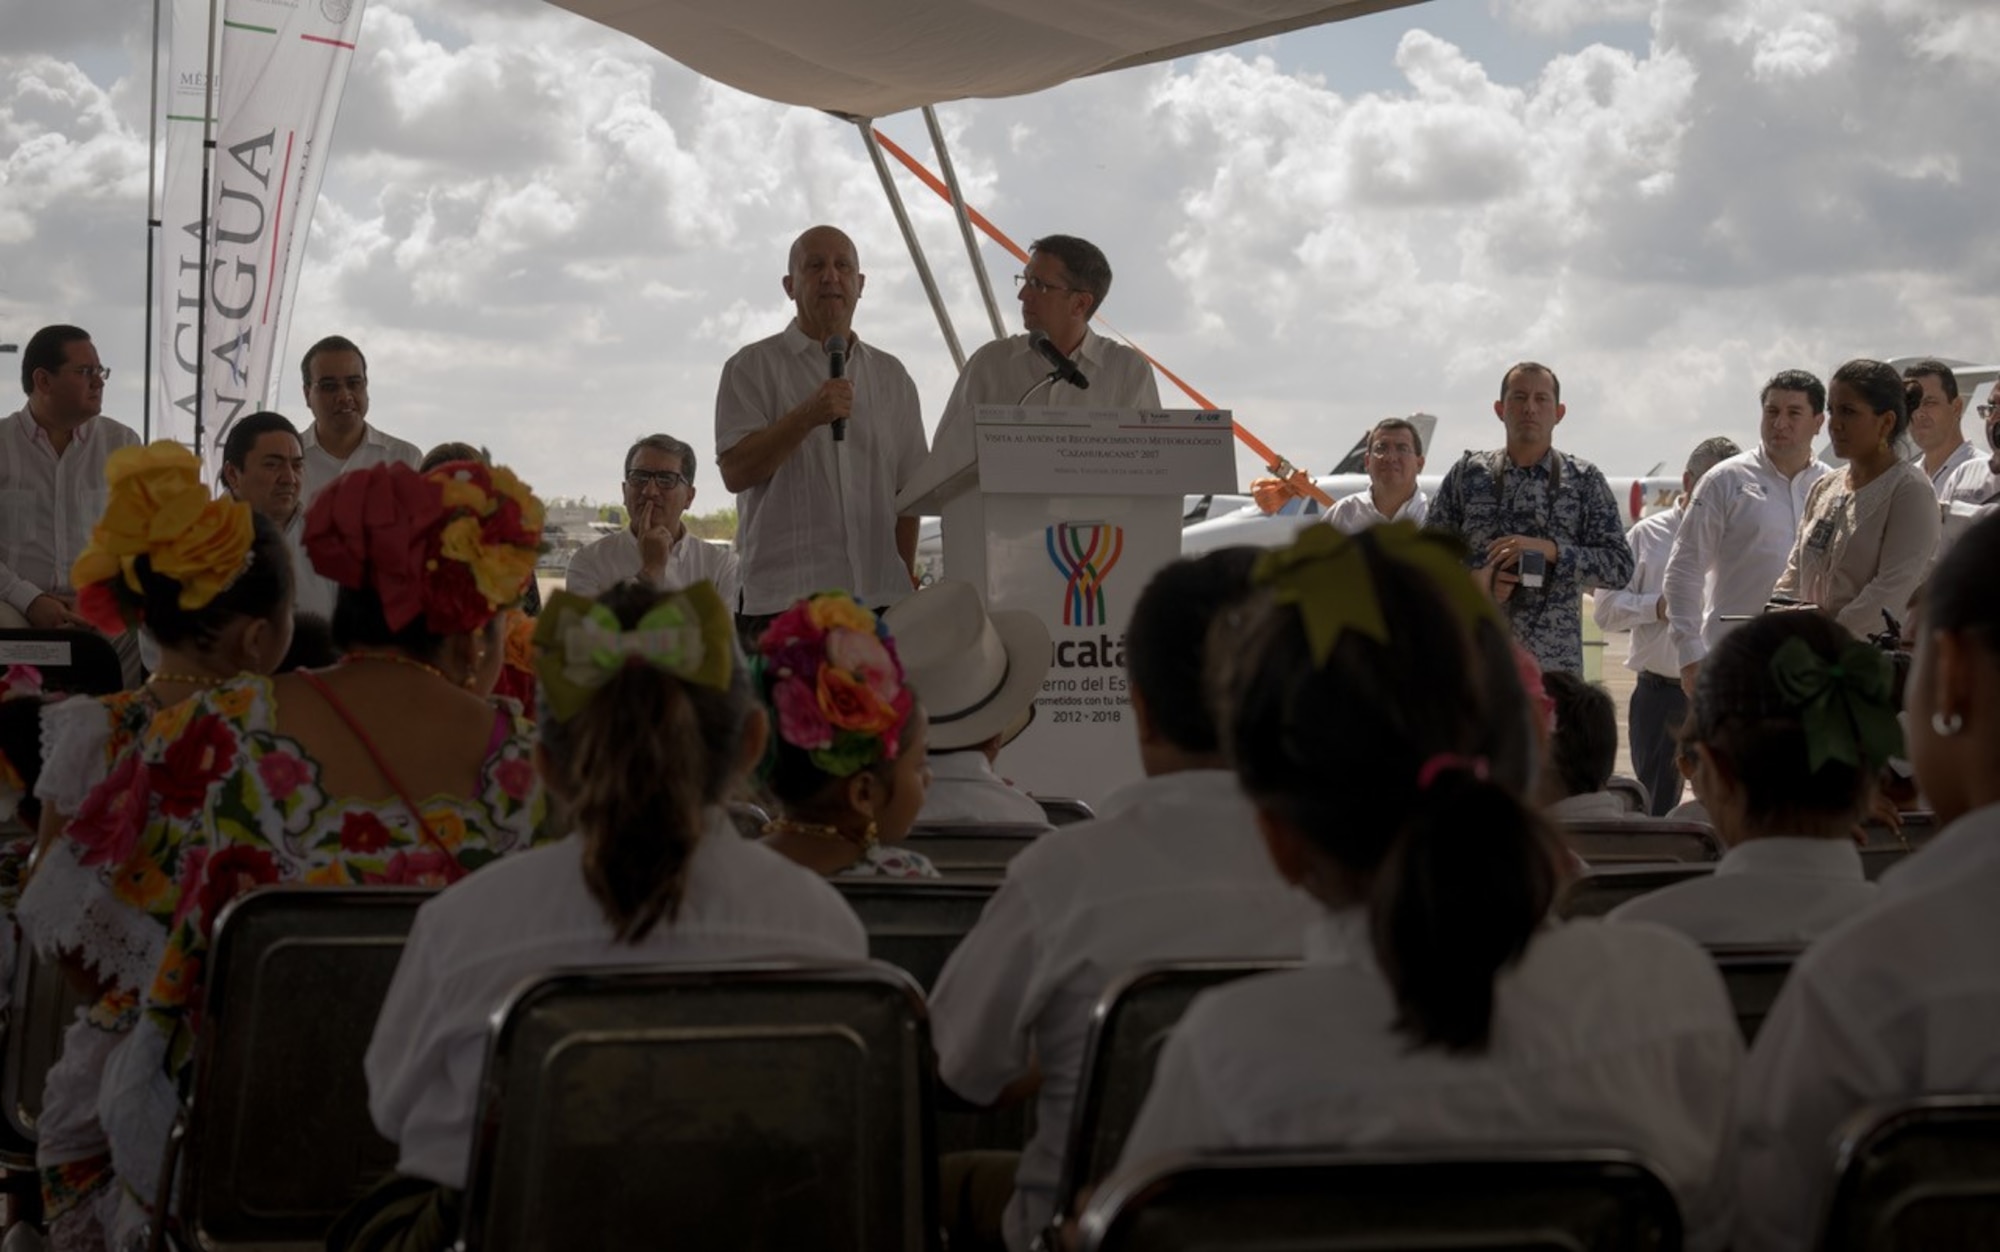 Officials from the National Oceanic and Atmospheric Administration’s National Hurricane Center, Dr. Rick Knabb, director and Lixion Avila, senior hurricane specialist, talk about hurricane readiness during the Caribbean Hurricane Awareness Tour in Mérida,Yucatan, Mexico April 15, 2017. Attendees included the Governor of Yucatan, Rolando Zapata Bello, and more than thirteen-thousand local schools and residents. (U.S. Air Force photo/Staff Sgt. Shelton Sherrill)